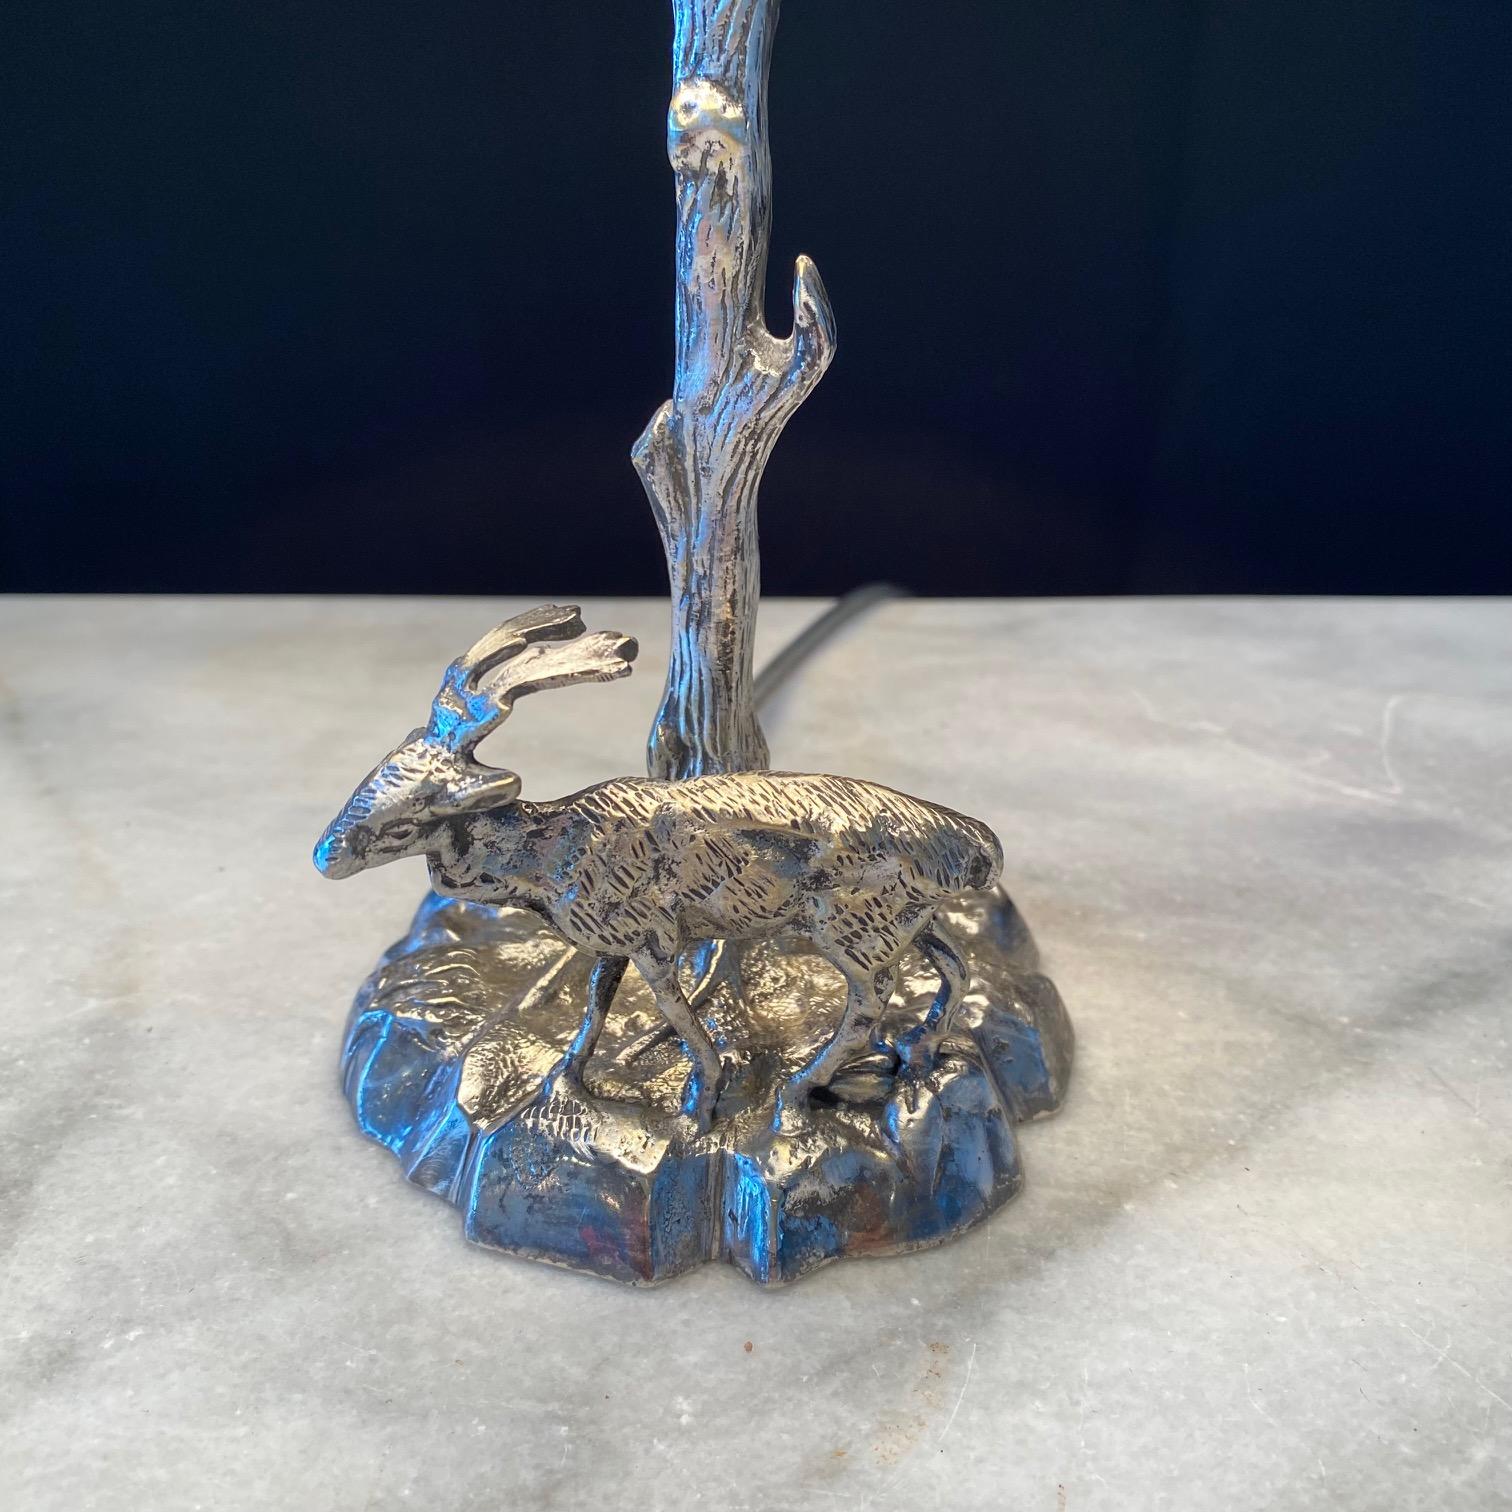 Valenti stag or deer table lamp from the 1970’s. Fine quality solid silvered bronze sculpture by the highly sought after Spanish artist Valenti: depicts a wild stag and tree. This sculpture depicts a wild stag under a finely sculpted tree with